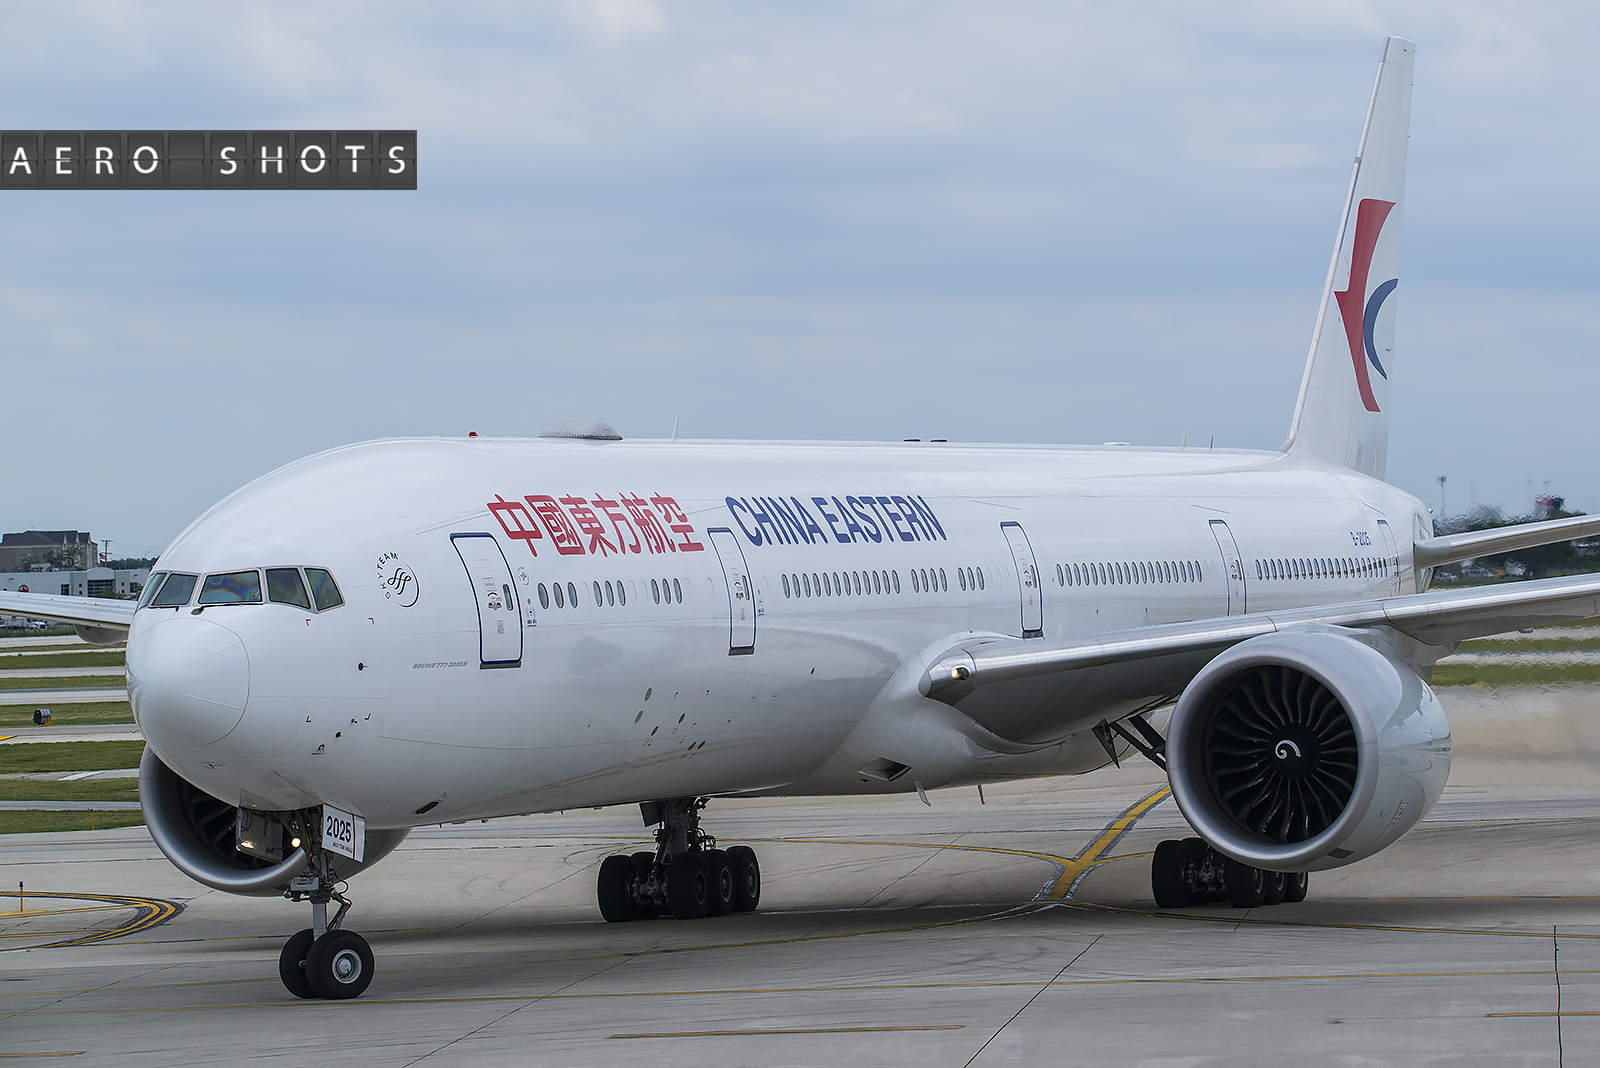 China Eastern 777 arriving from Shanghai